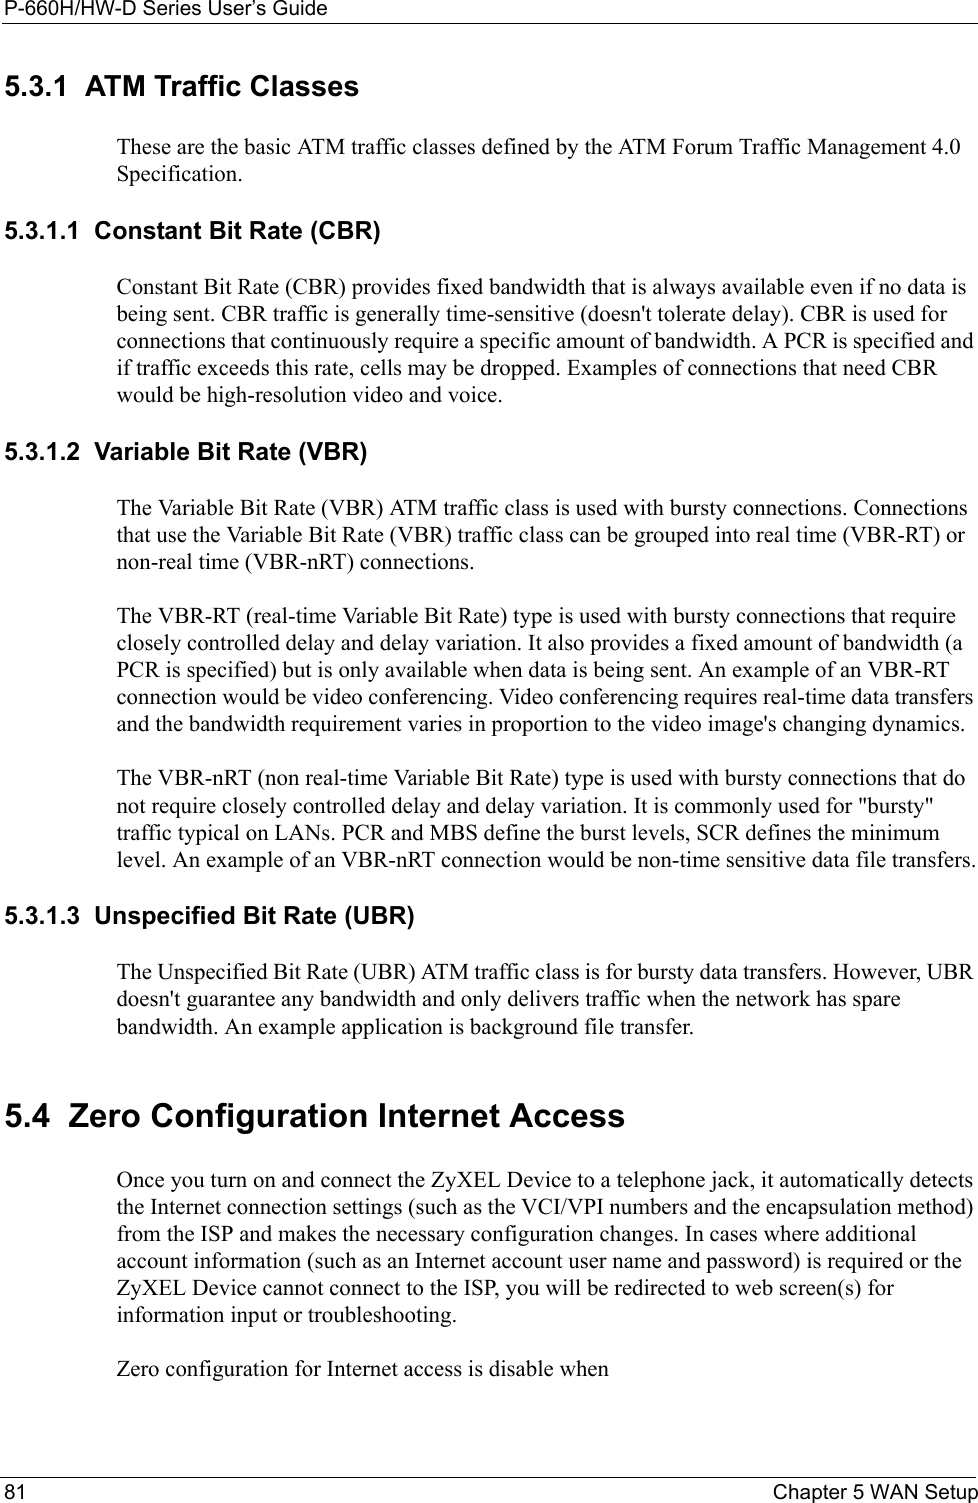 P-660H/HW-D Series User’s Guide81 Chapter 5 WAN Setup5.3.1  ATM Traffic ClassesThese are the basic ATM traffic classes defined by the ATM Forum Traffic Management 4.0 Specification. 5.3.1.1  Constant Bit Rate (CBR)Constant Bit Rate (CBR) provides fixed bandwidth that is always available even if no data is being sent. CBR traffic is generally time-sensitive (doesn&apos;t tolerate delay). CBR is used for connections that continuously require a specific amount of bandwidth. A PCR is specified and if traffic exceeds this rate, cells may be dropped. Examples of connections that need CBR would be high-resolution video and voice.5.3.1.2  Variable Bit Rate (VBR) The Variable Bit Rate (VBR) ATM traffic class is used with bursty connections. Connections that use the Variable Bit Rate (VBR) traffic class can be grouped into real time (VBR-RT) or non-real time (VBR-nRT) connections. The VBR-RT (real-time Variable Bit Rate) type is used with bursty connections that require closely controlled delay and delay variation. It also provides a fixed amount of bandwidth (a PCR is specified) but is only available when data is being sent. An example of an VBR-RT connection would be video conferencing. Video conferencing requires real-time data transfers and the bandwidth requirement varies in proportion to the video image&apos;s changing dynamics. The VBR-nRT (non real-time Variable Bit Rate) type is used with bursty connections that do not require closely controlled delay and delay variation. It is commonly used for &quot;bursty&quot; traffic typical on LANs. PCR and MBS define the burst levels, SCR defines the minimum level. An example of an VBR-nRT connection would be non-time sensitive data file transfers.5.3.1.3  Unspecified Bit Rate (UBR)The Unspecified Bit Rate (UBR) ATM traffic class is for bursty data transfers. However, UBR doesn&apos;t guarantee any bandwidth and only delivers traffic when the network has spare bandwidth. An example application is background file transfer.5.4  Zero Configuration Internet AccessOnce you turn on and connect the ZyXEL Device to a telephone jack, it automatically detects the Internet connection settings (such as the VCI/VPI numbers and the encapsulation method) from the ISP and makes the necessary configuration changes. In cases where additional account information (such as an Internet account user name and password) is required or the ZyXEL Device cannot connect to the ISP, you will be redirected to web screen(s) for information input or troubleshooting.Zero configuration for Internet access is disable when 